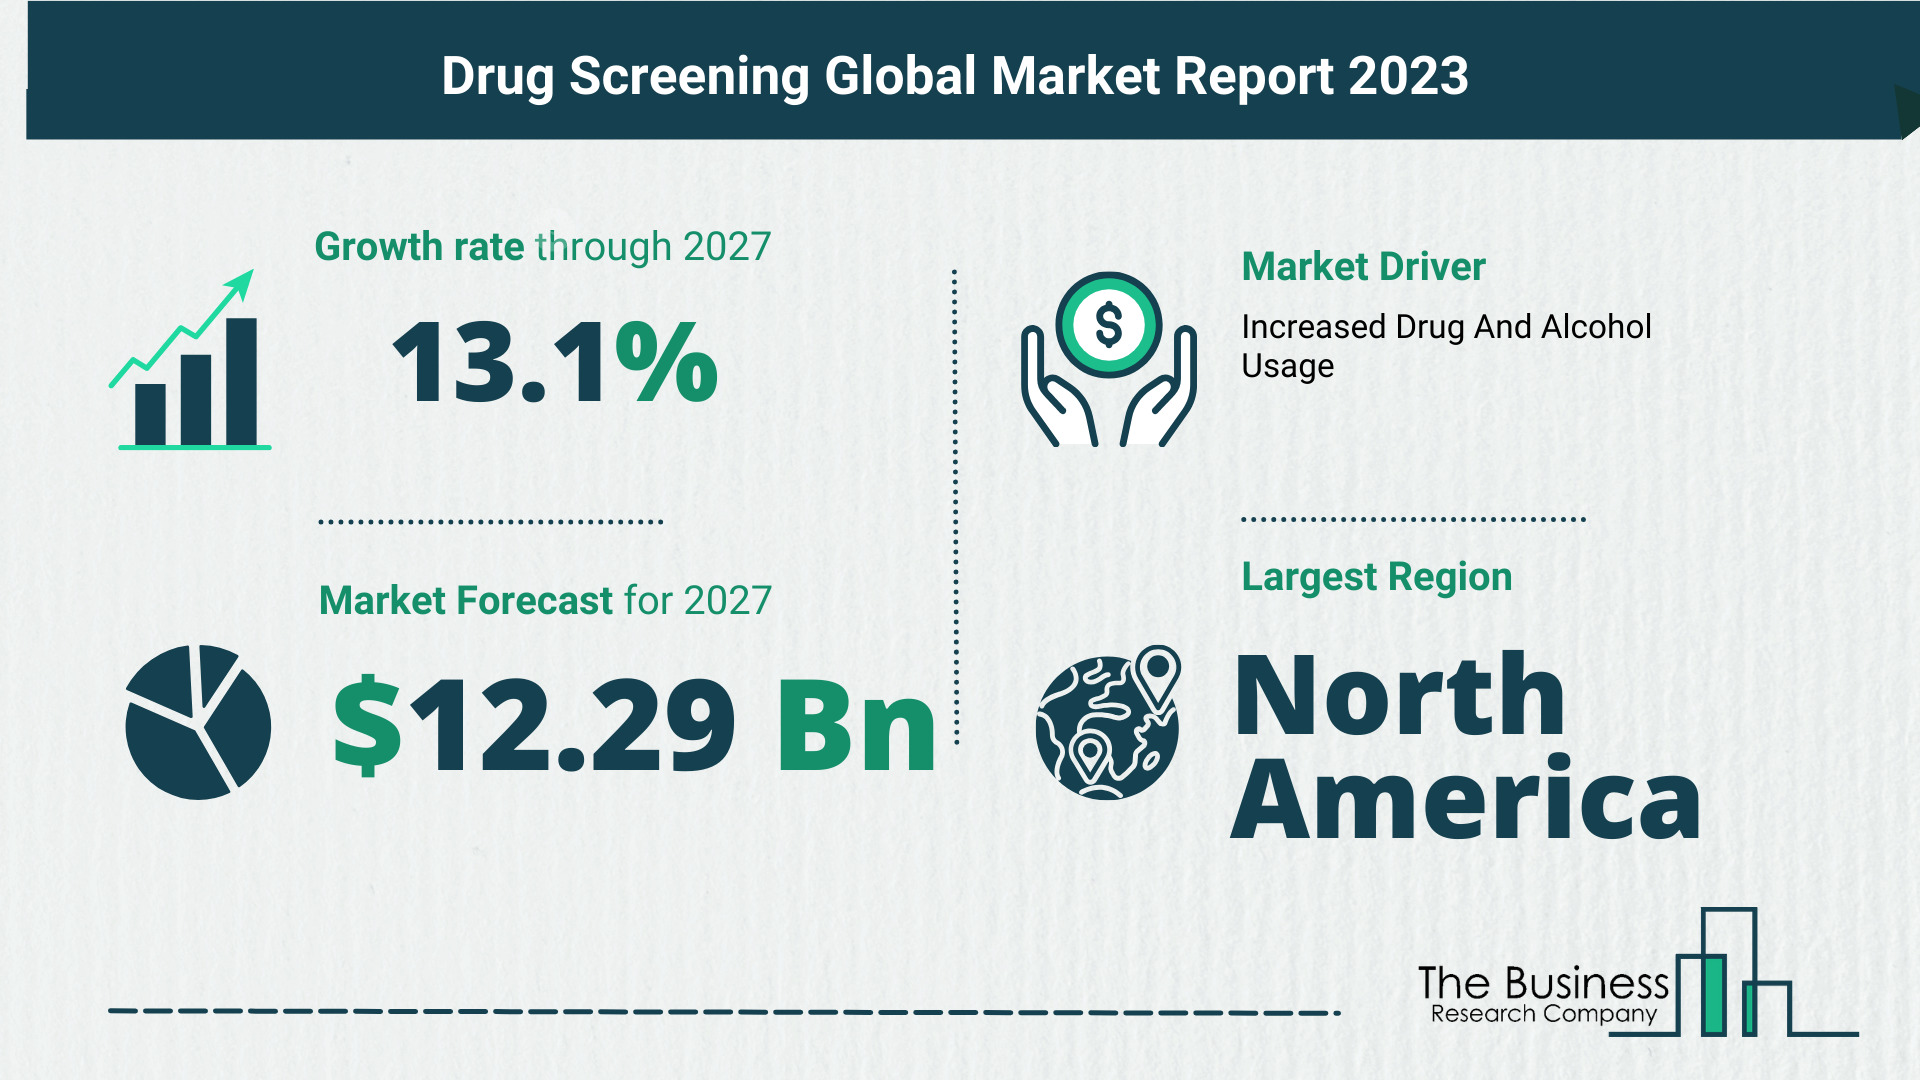 Overview Of The Drug Screening Market 2023: Size, Drivers, And Trends